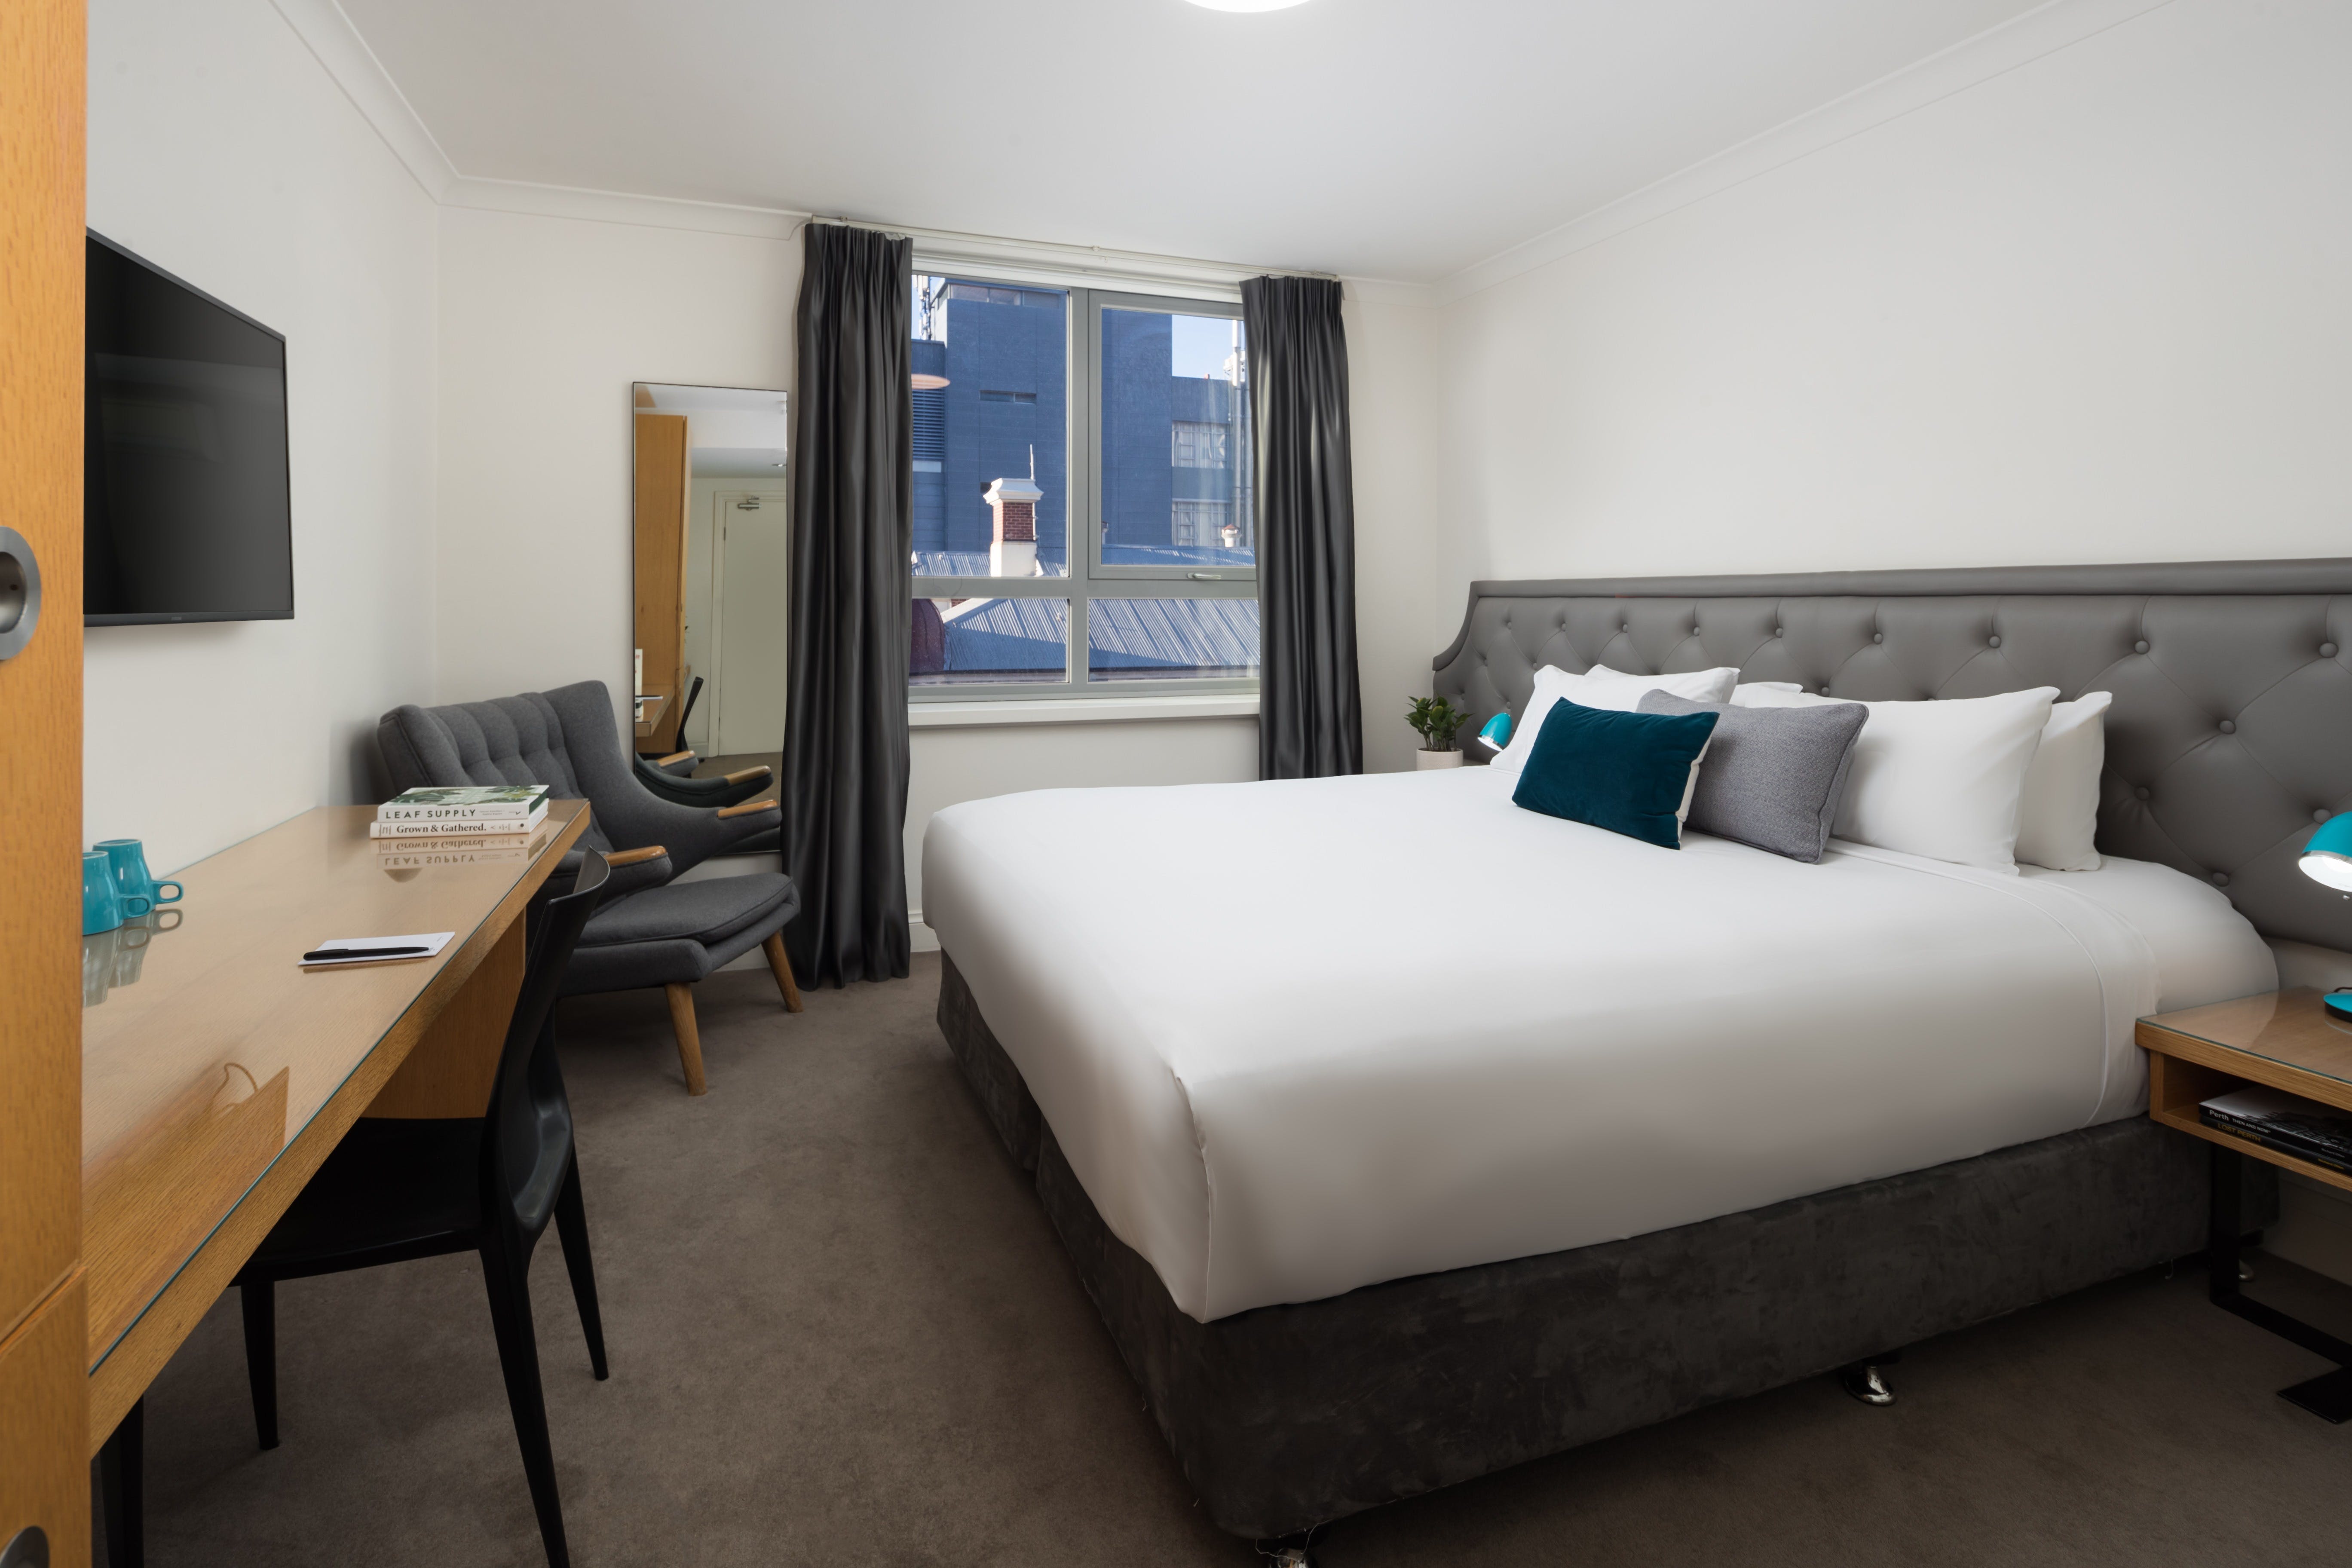 Pensione Hotel Perth - Accommodation Bookings 0